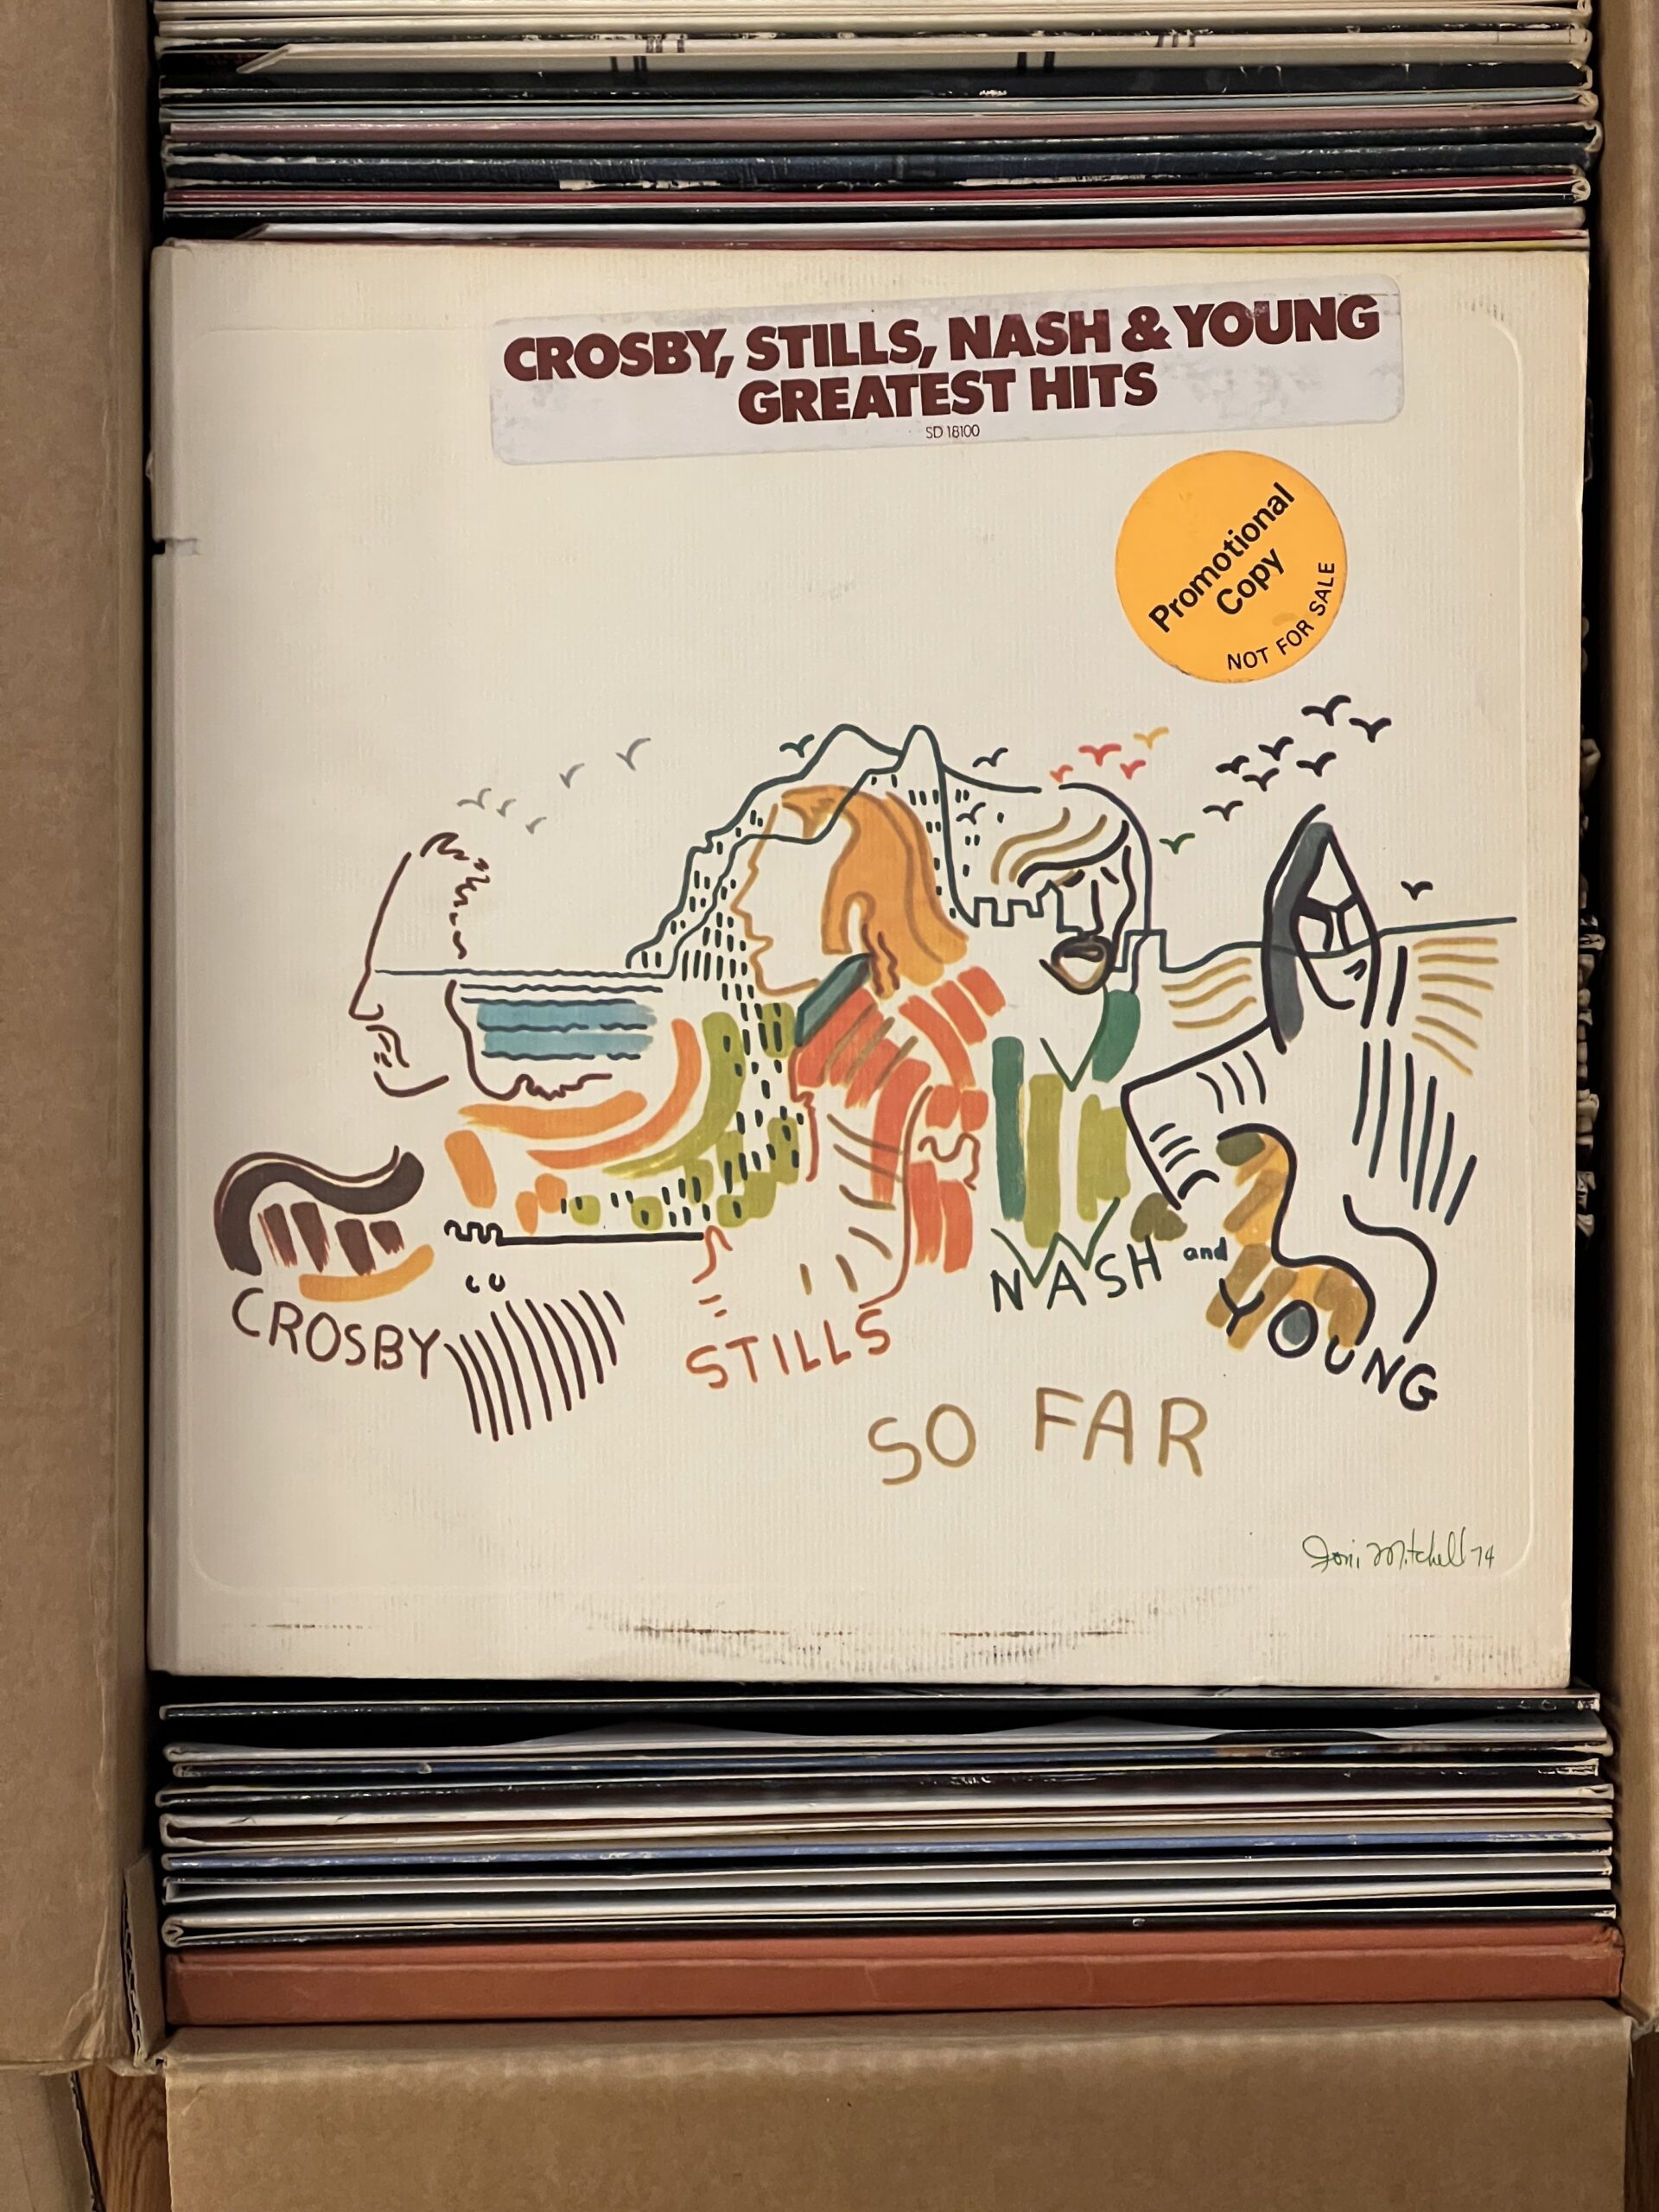 So Far by Crosby, Stills, Nash and Young (Vinyl record album review)